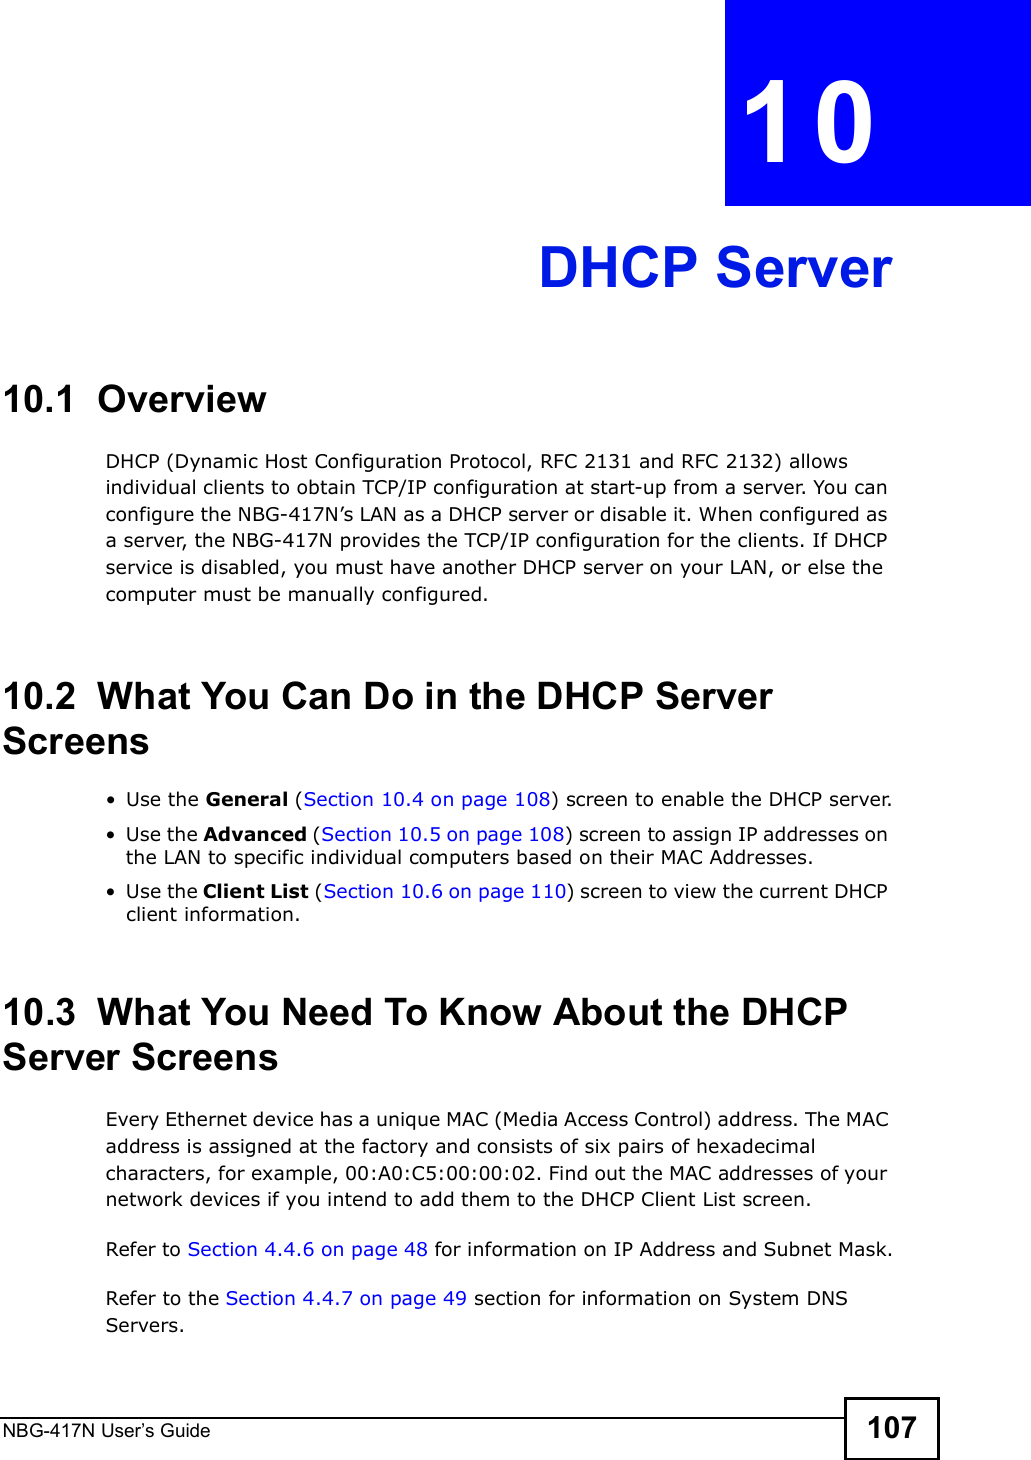 NBG-417N User s Guide 107CHAPTER  10 DHCP Server10.1  OverviewDHCP (Dynamic Host Configuration Protocol, RFC 2131 and RFC 2132) allows individual clients to obtain TCP/IP configuration at start-up from a server. You can configure the NBG-417N!s LAN as a DHCP server or disable it. When configured as a server, the NBG-417N provides the TCP/IP configuration for the clients. If DHCP service is disabled, you must have another DHCP server on your LAN, or else the computer must be manually configured.10.2  What You Can Do in the DHCP Server Screens Use the General (Section 10.4 on page 108) screen to enable the DHCP server. Use the Advanced (Section 10.5 on page 108) screen to assign IP addresses on the LAN to specific individual computers based on their MAC Addresses. Use the Client List (Section 10.6 on page 110) screen to view the current DHCP client information. 10.3  What You Need To Know About the DHCP Server ScreensEvery Ethernet device has a unique MAC (Media Access Control) address. The MAC address is assigned at the factory and consists of six pairs of hexadecimal characters, for example, 00:A0:C5:00:00:02. Find out the MAC addresses of your network devices if you intend to add them to the DHCP Client List screen.Refer to Section 4.4.6 on page 48 for information on IP Address and Subnet Mask.Refer to the Section 4.4.7 on page 49 section for information on System DNS Servers.